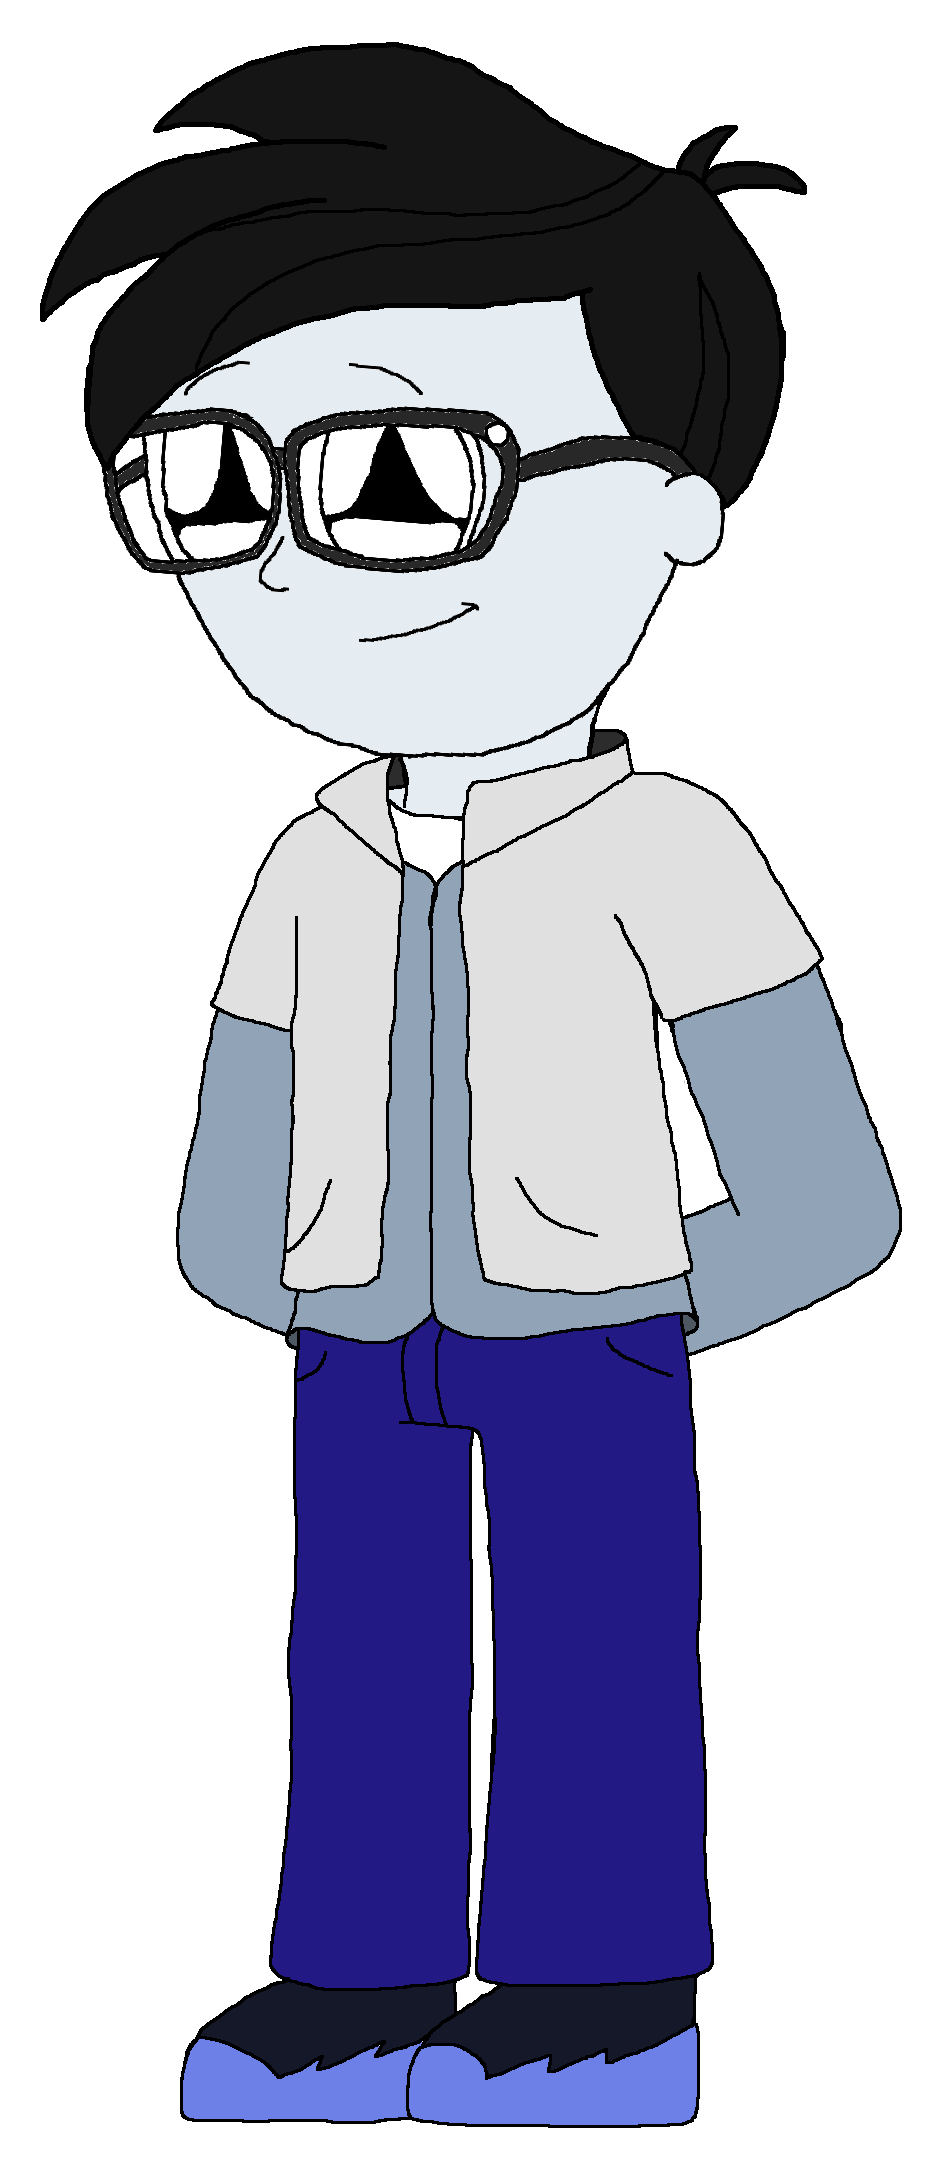 Human Mumble Teenager Boy (with Outfit) by asherbuddy on DeviantArt